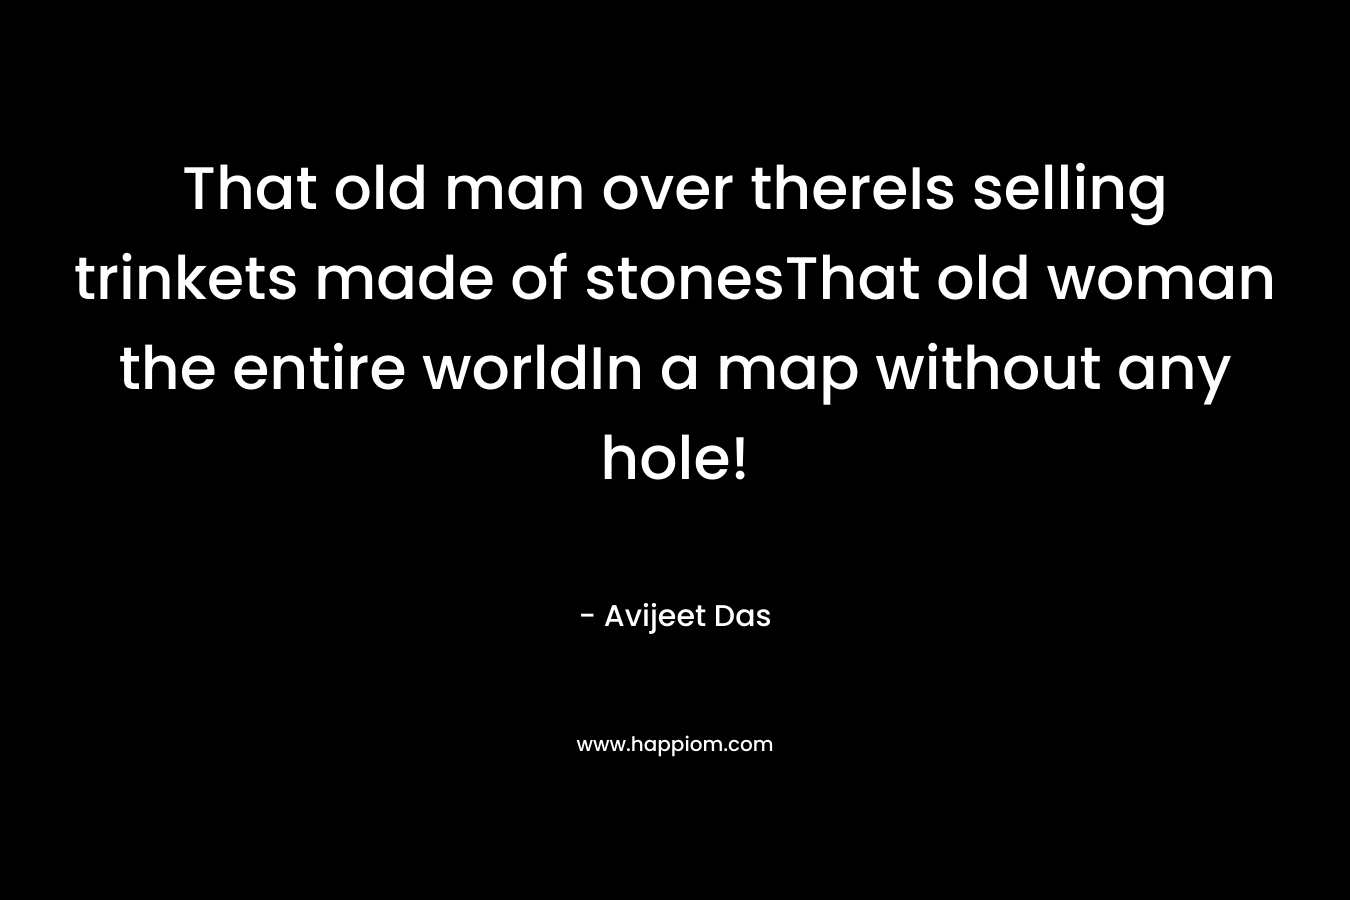 That old man over thereIs selling trinkets made of stonesThat old woman the entire worldIn a map without any hole! – Avijeet Das